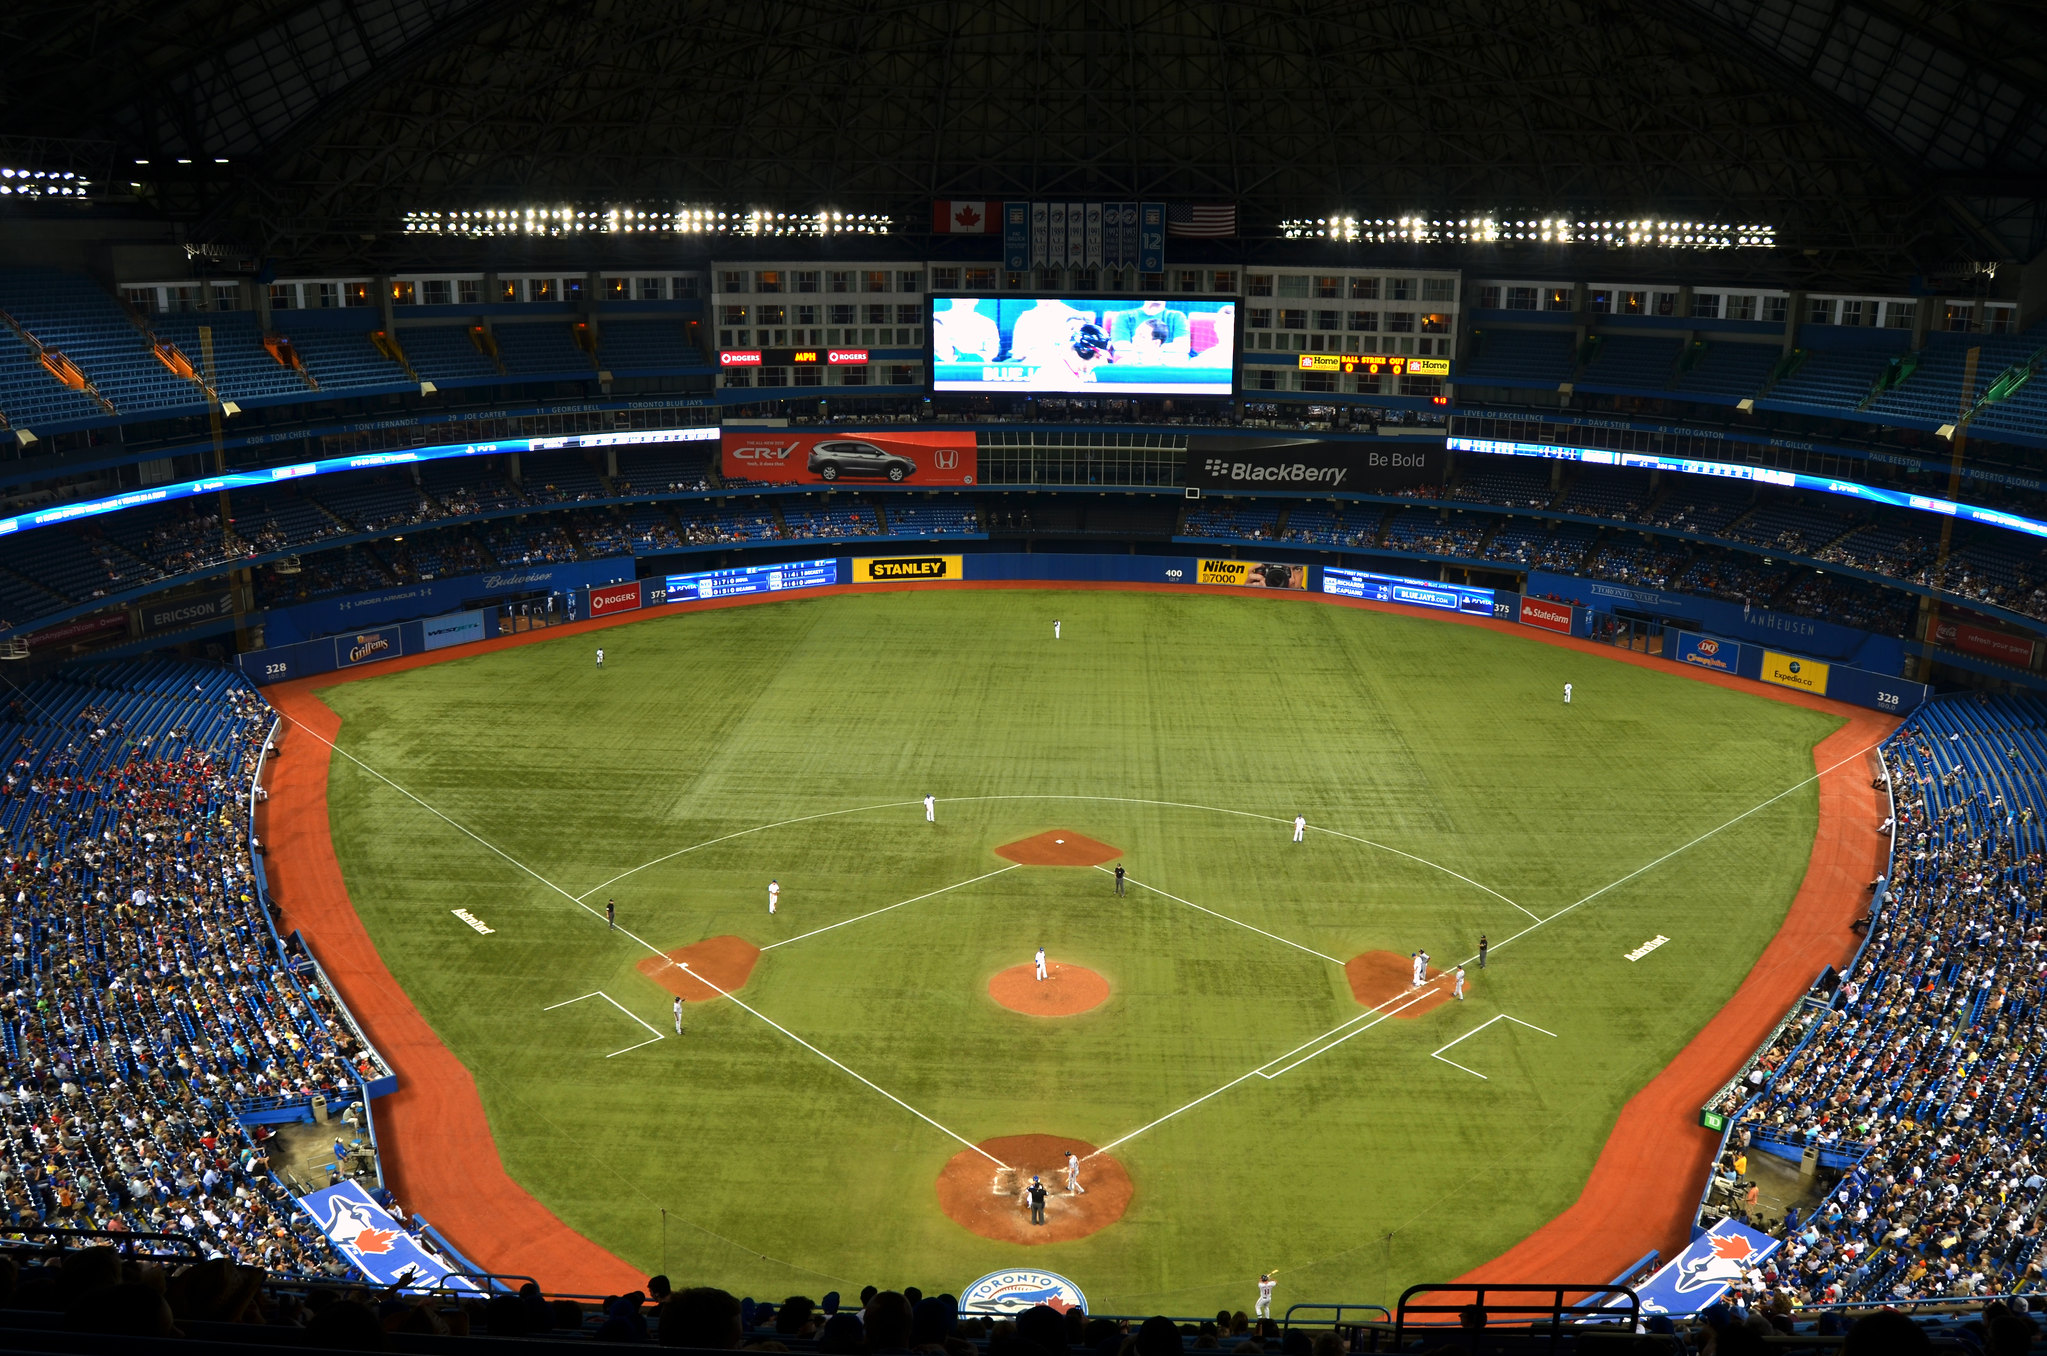 view of the baseball field at rogers centre